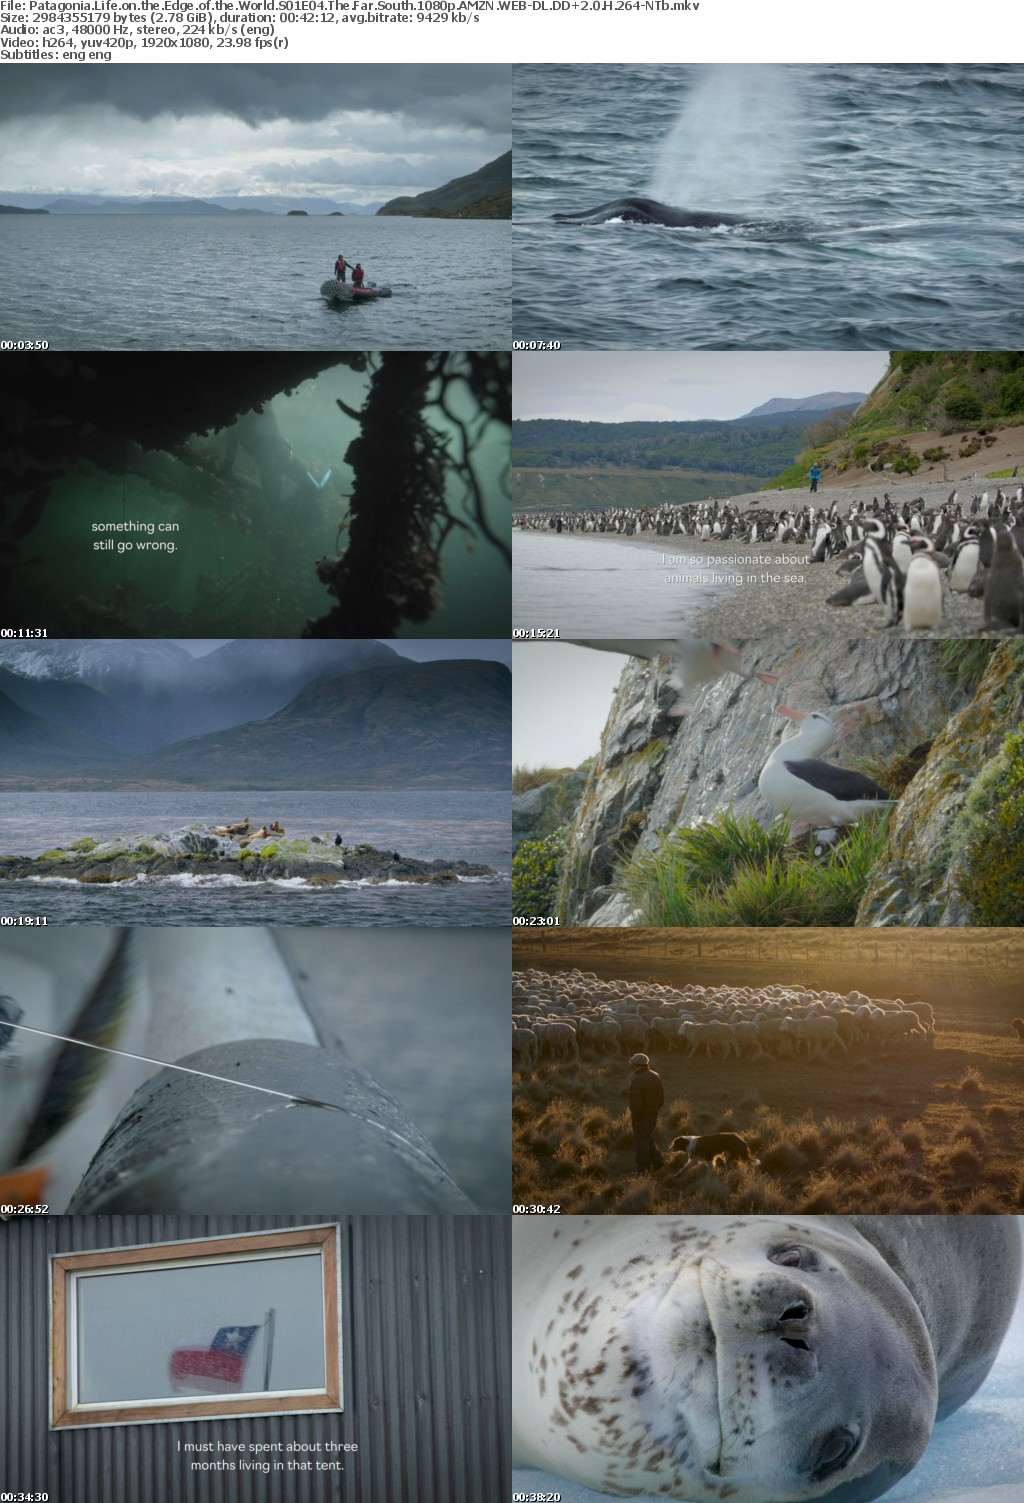 Patagonia Life on the Edge of the World S01E04 The Far South 1080p AMZN WEBRip DDP2 0 x264-NTb